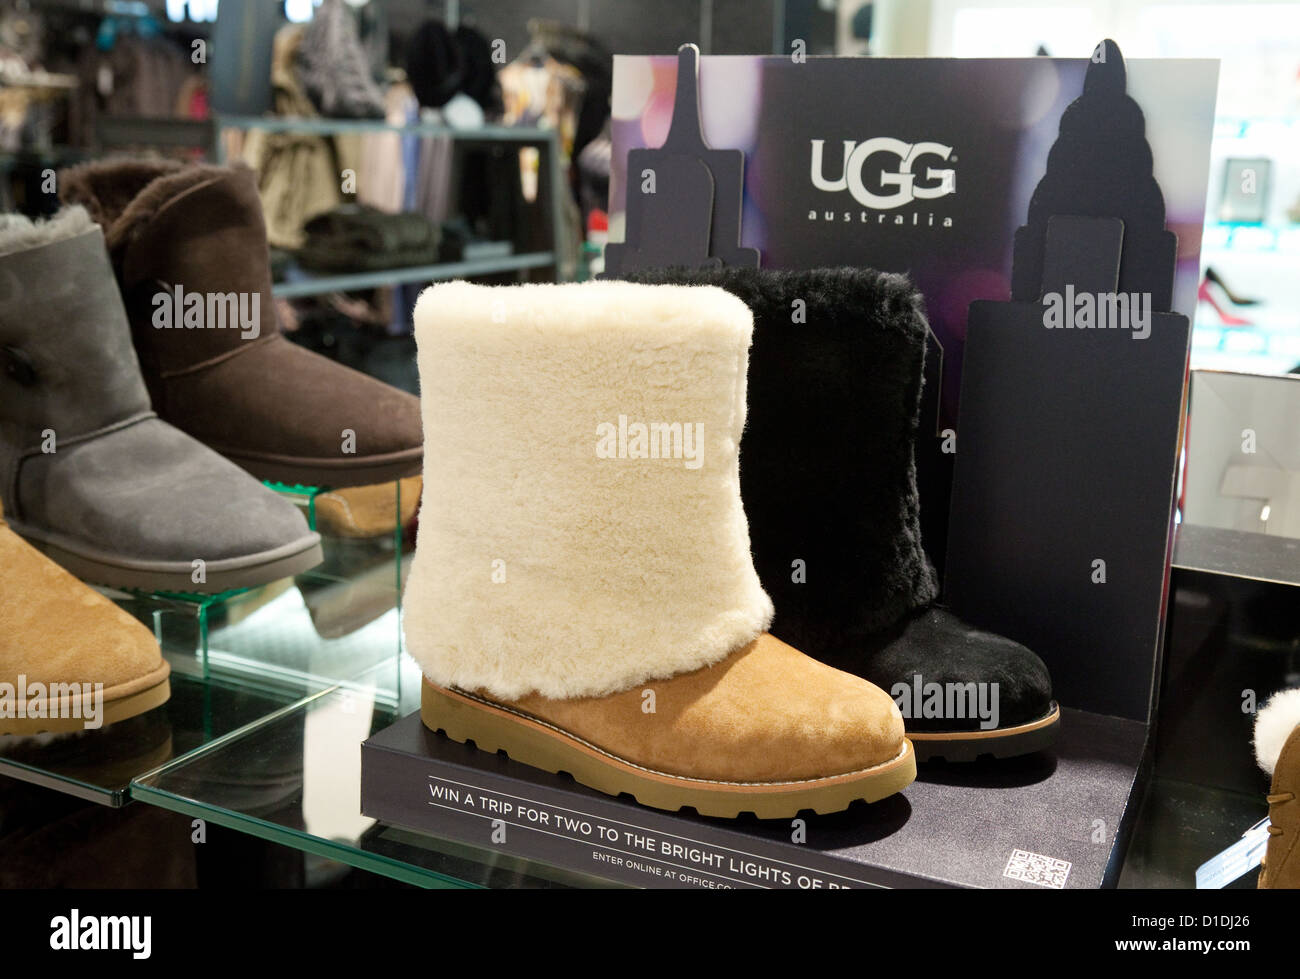 Ugg boots for sale in a Debenhams store selling Uggs, MK centre Stock Photo, Royalty Free Image ...